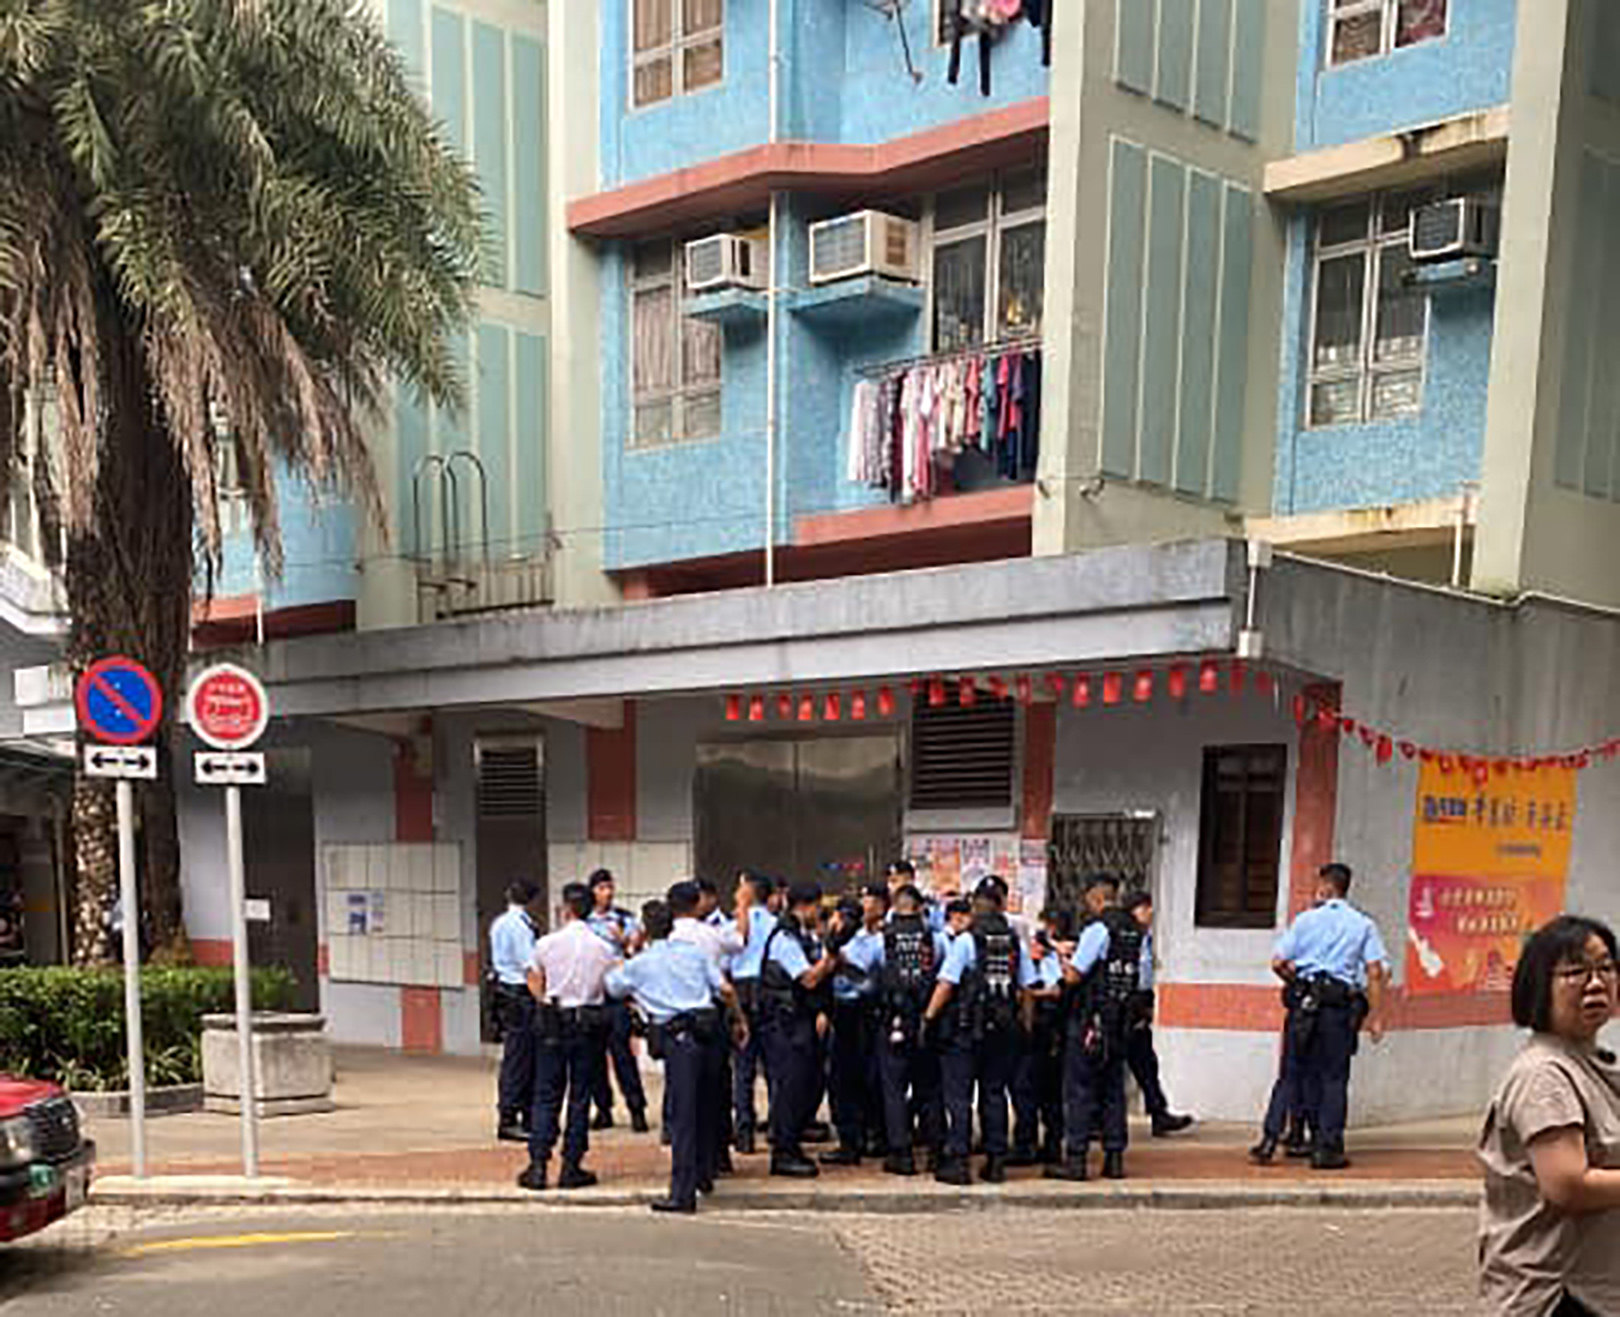 Police outside a block of flats in Ching Yuk House at Tsz Ching Estate in Tsz Wan Shan, where an investigation was launched after an 85-year-old woman was found dead and a man was discovered hanged in his home. Photo: Facebook / Siuu Kinn